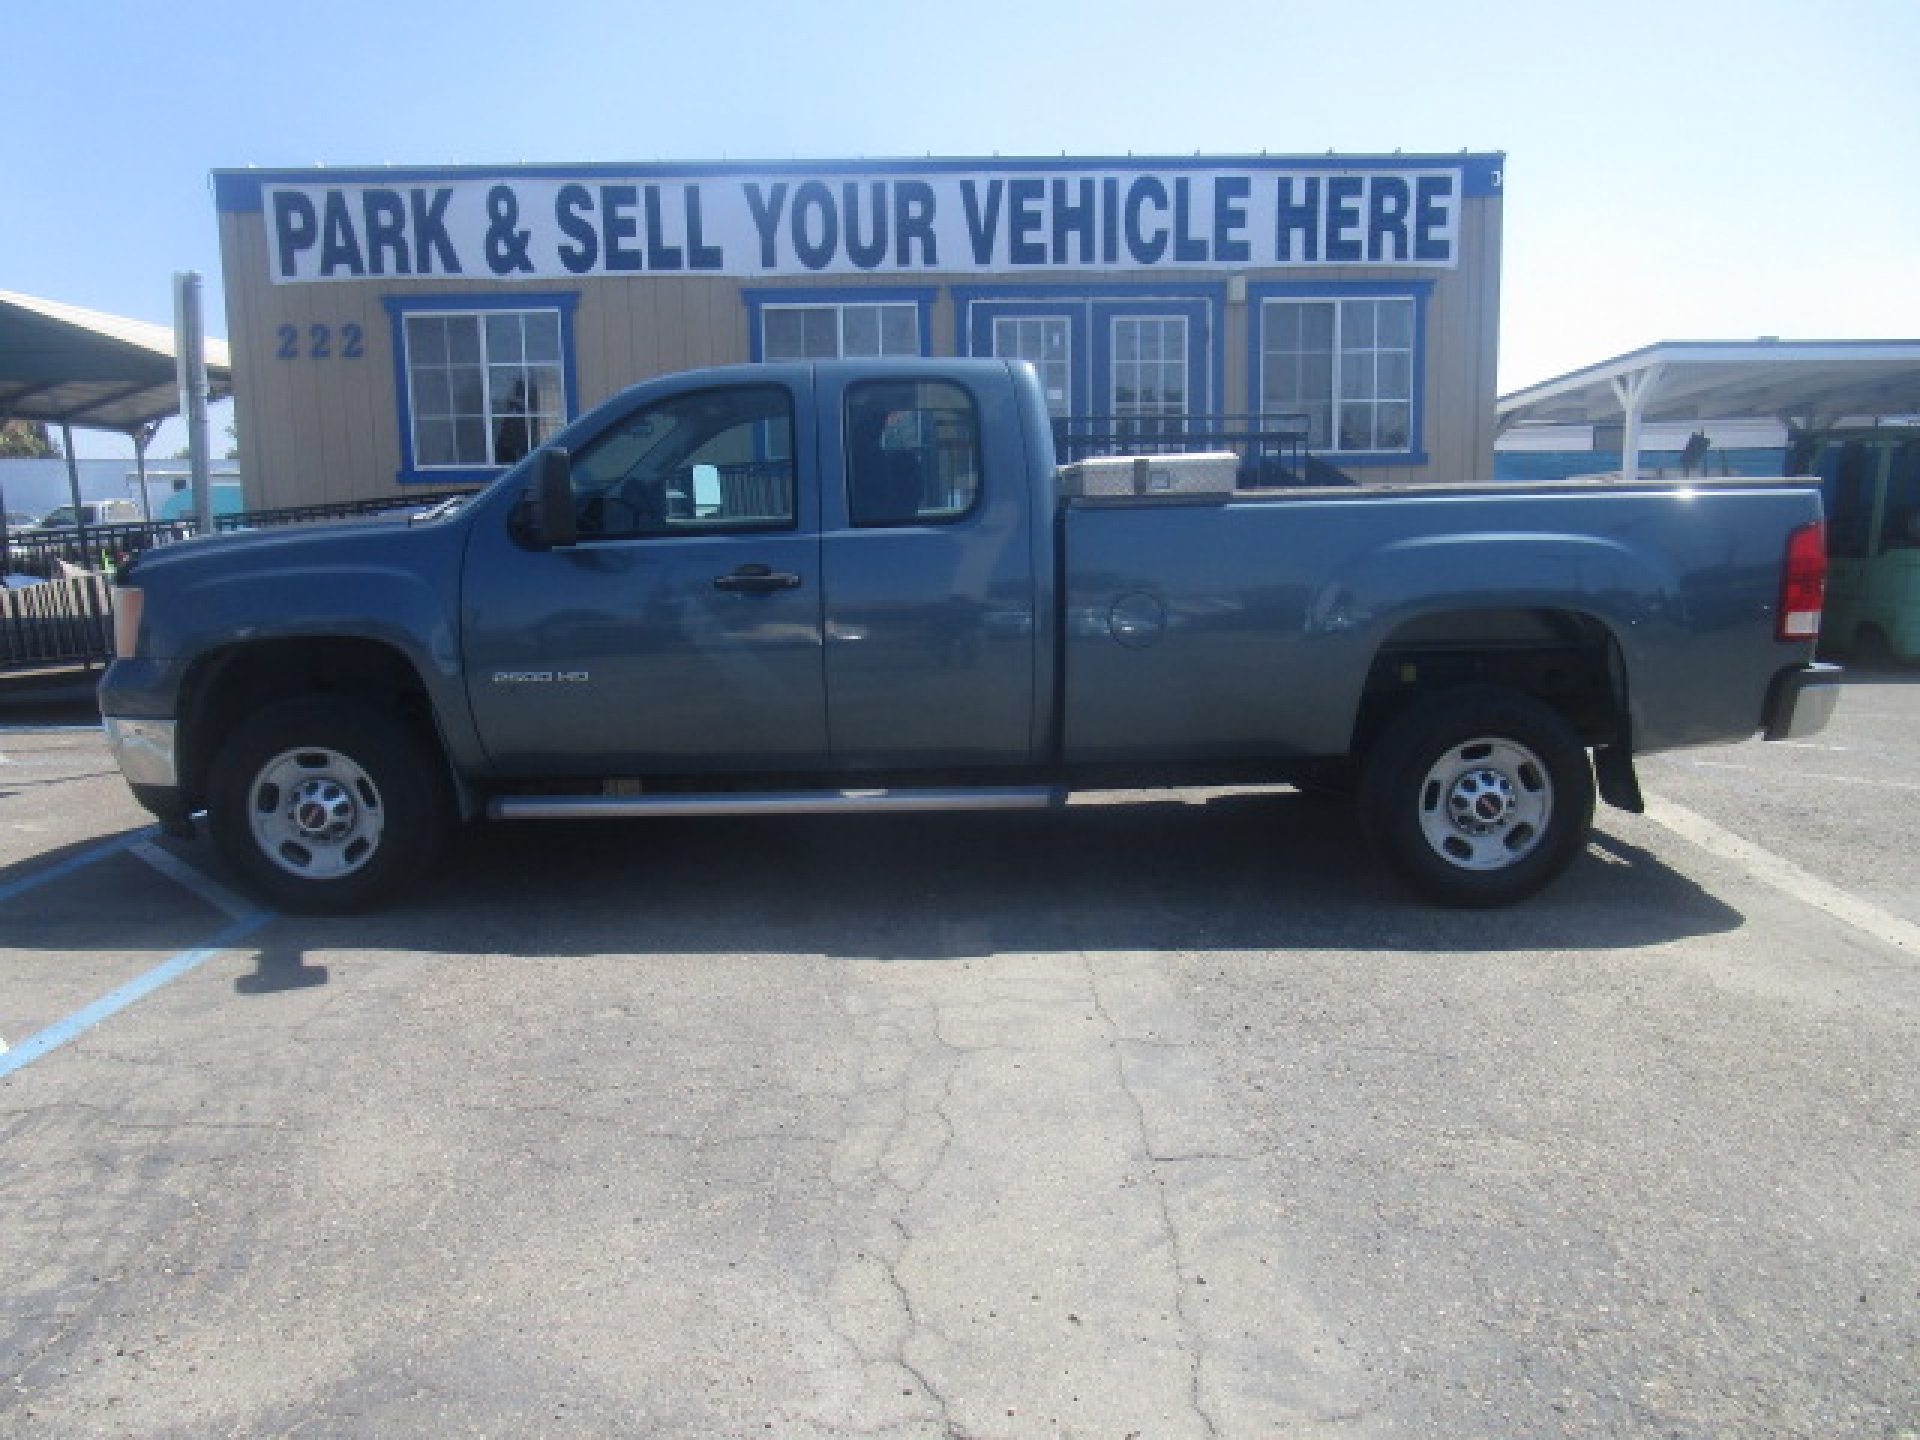 2011 GMC Extended Cab 2500 HD Longbed Truck